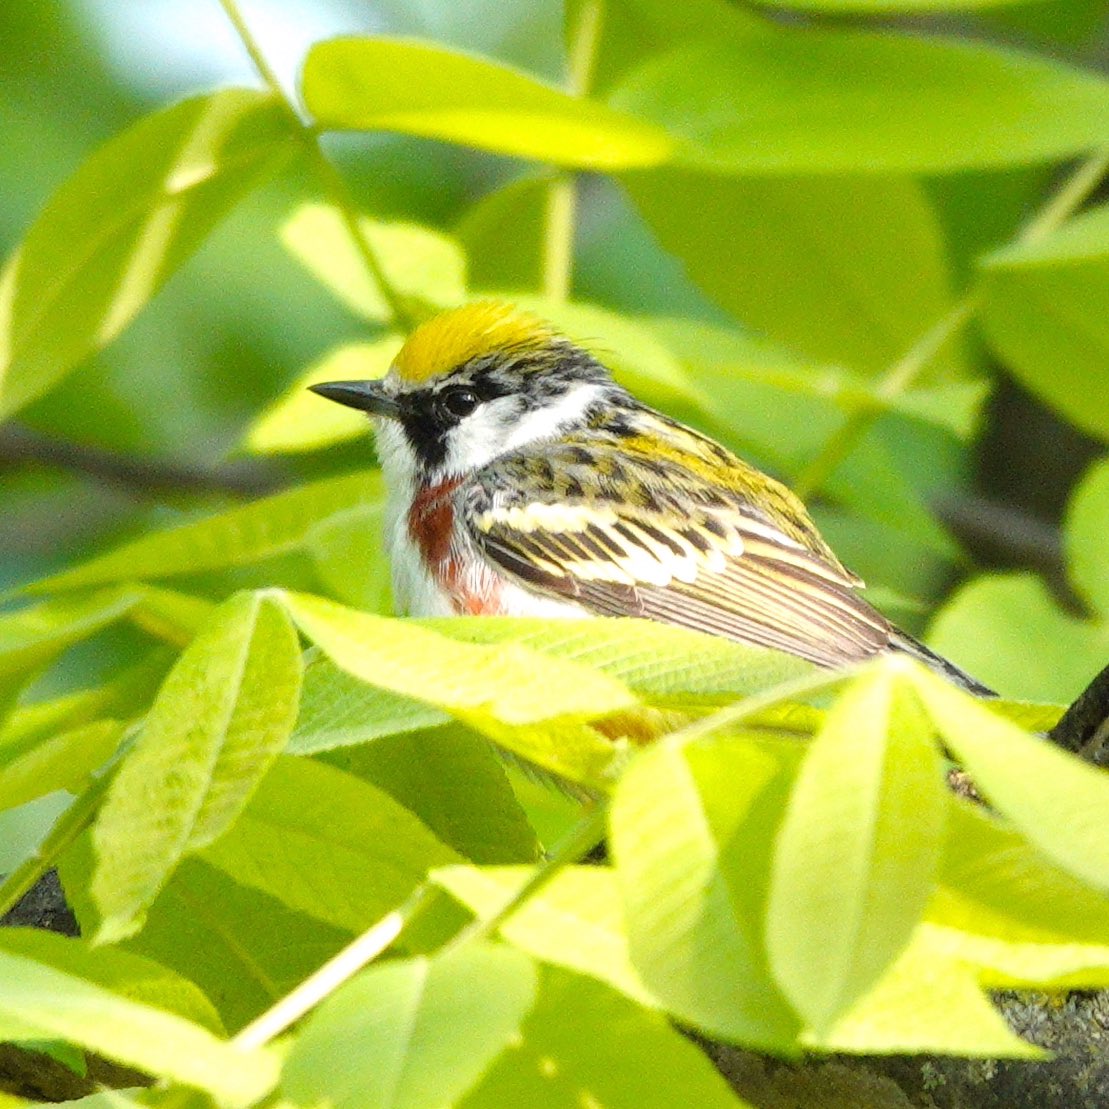 Chestnut-sided Warbler. These colorful warblers have the friendly phonetic “please-please-pleased to meetcha” often associated with their song! #warbler #warblers #birding #birdphotography #songbirds #springmigration #birdcp #birdcpp #birds #birdphotos #birdpics #bird